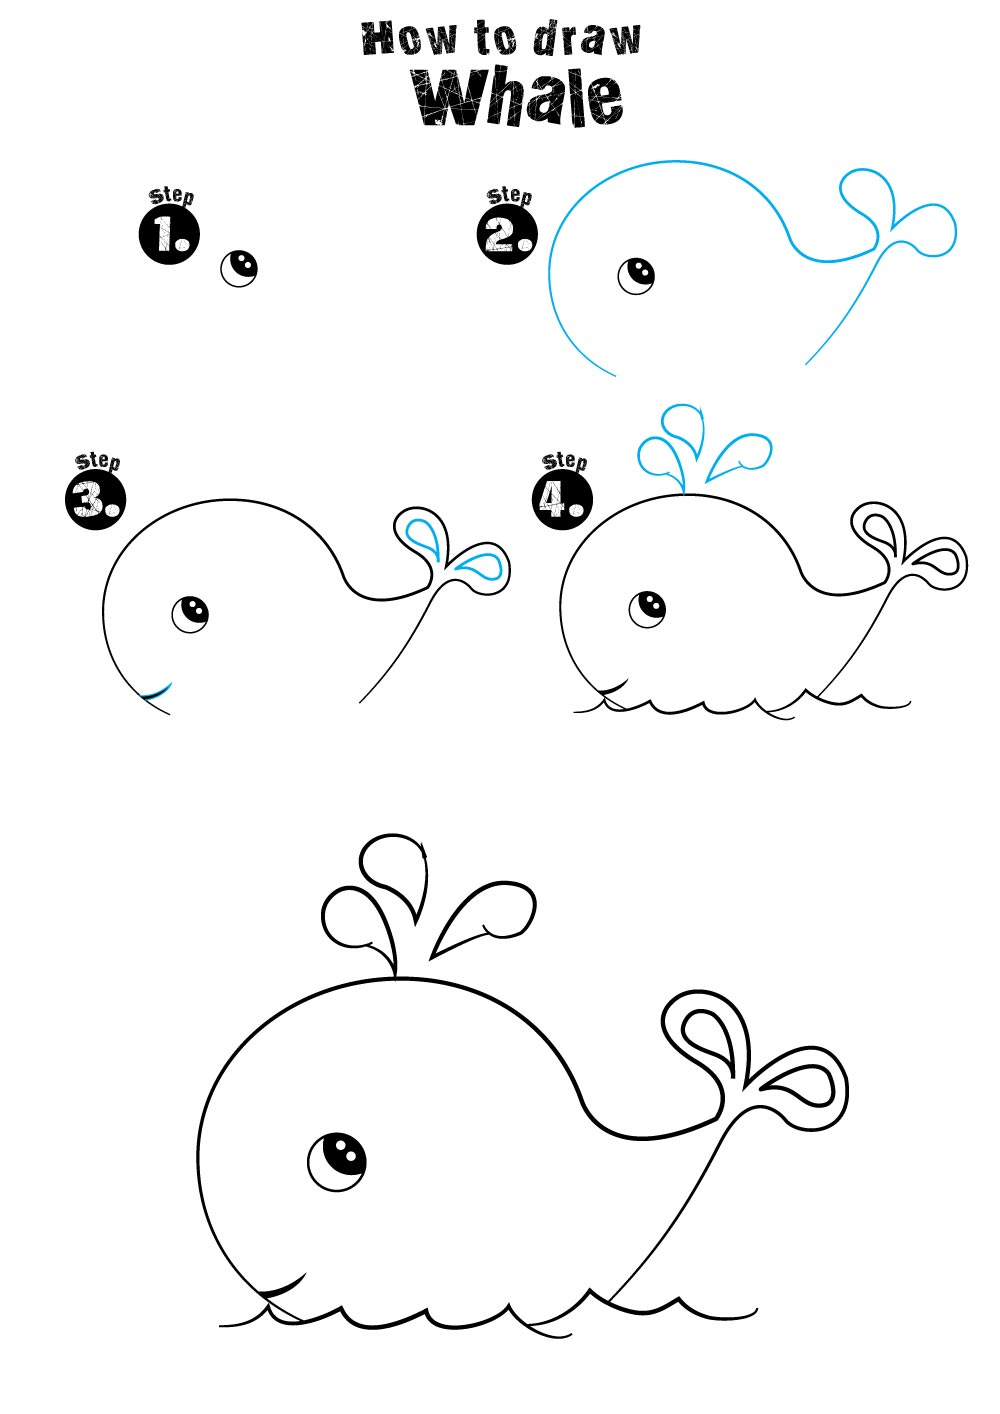  How To Draw A Whale Step By Step of all time Learn more here 